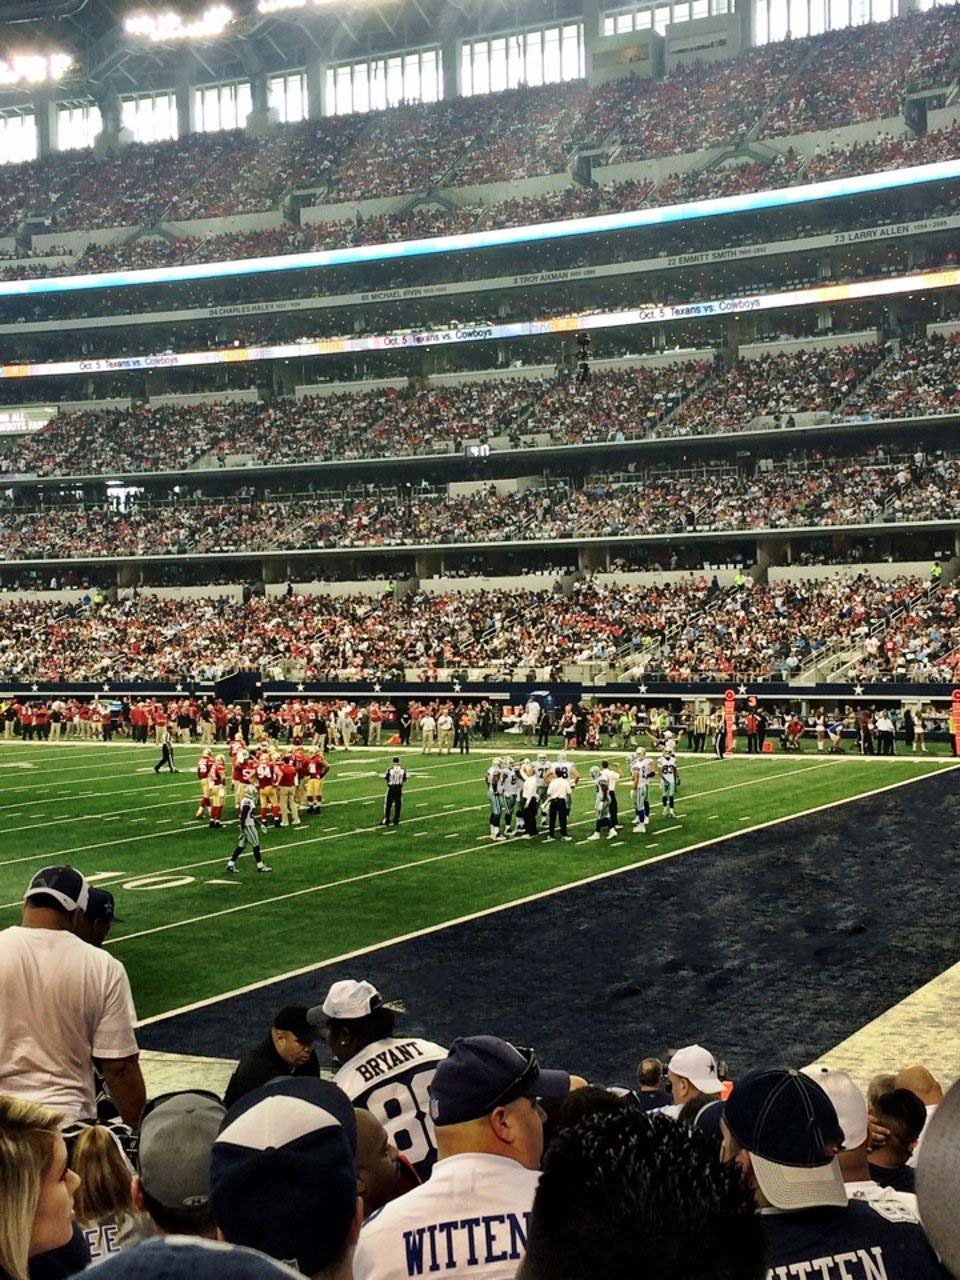 section 103, row 8 seat view  for football - at&t stadium (cowboys stadium)